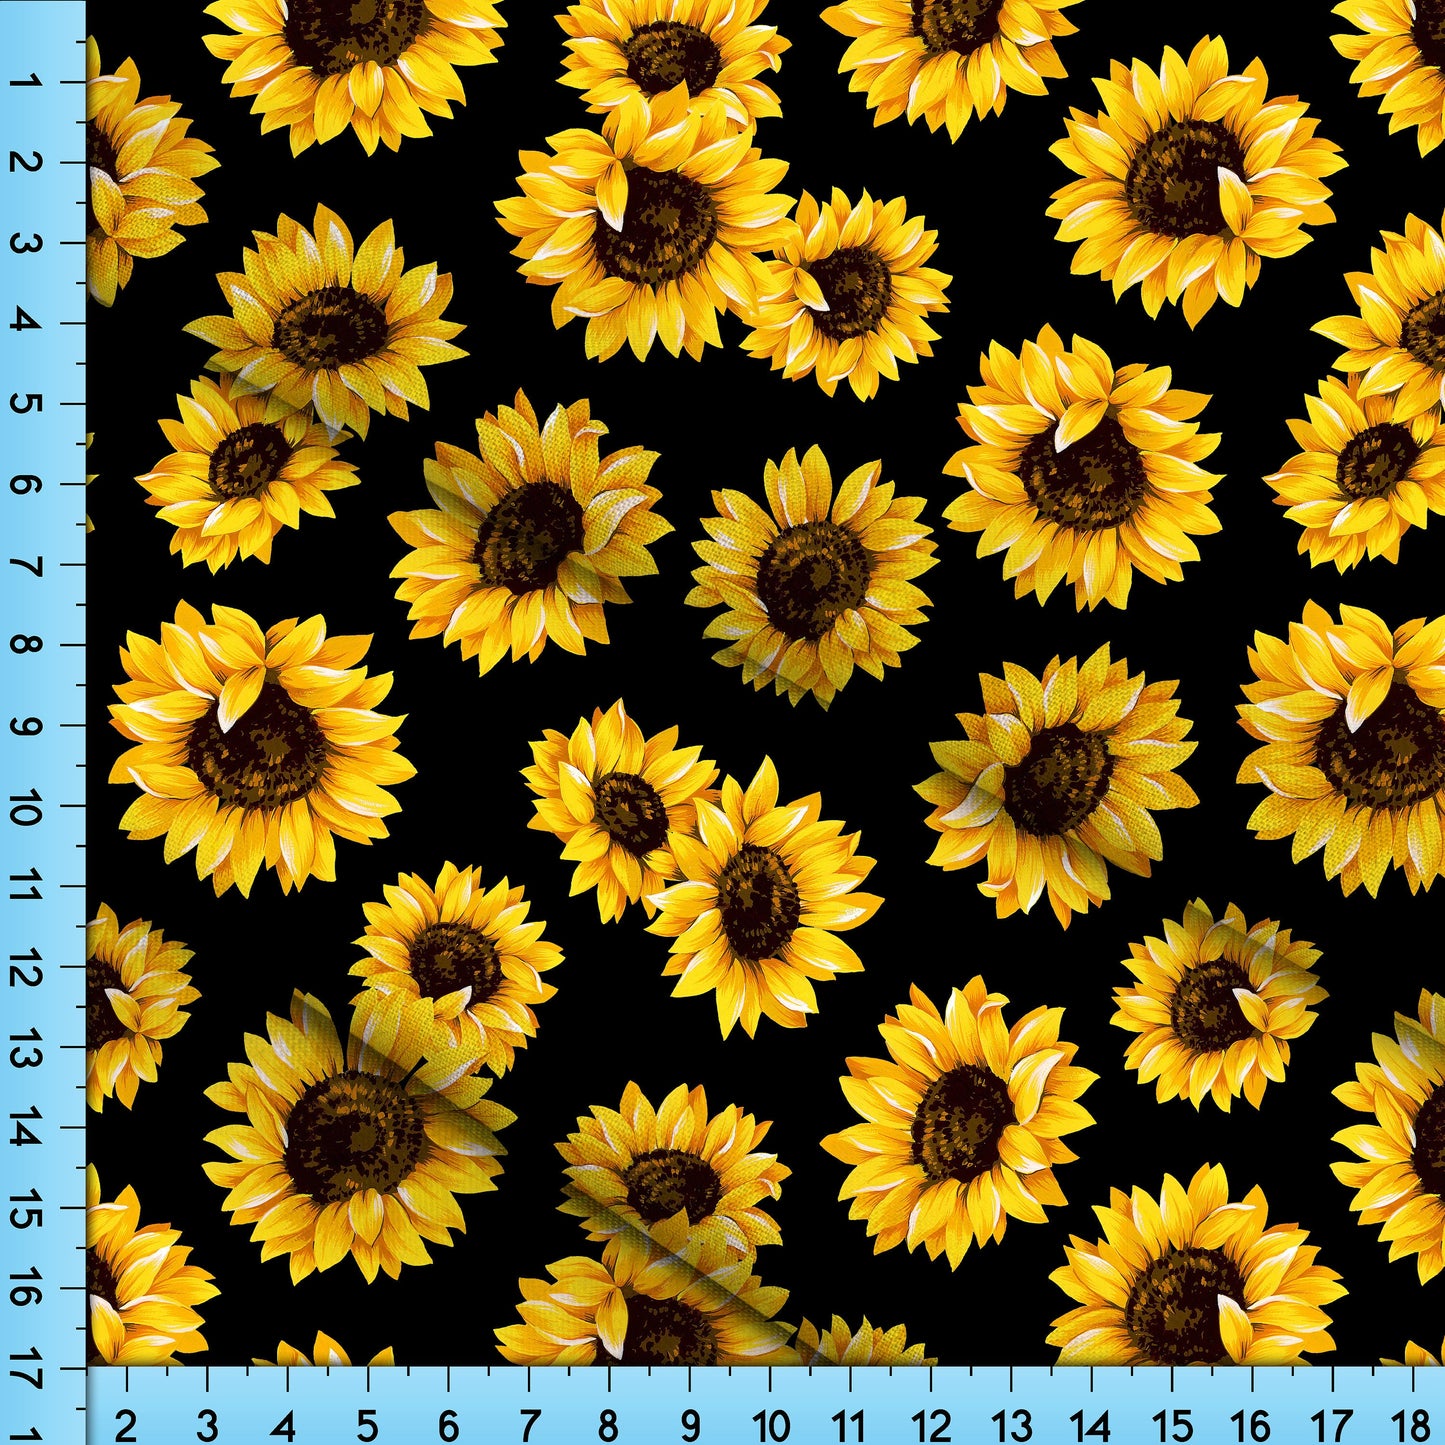 Sunflower Fabric By the Yard, Printed fabric of your choice featuring Wild Yellow Sunflowers on Black Background